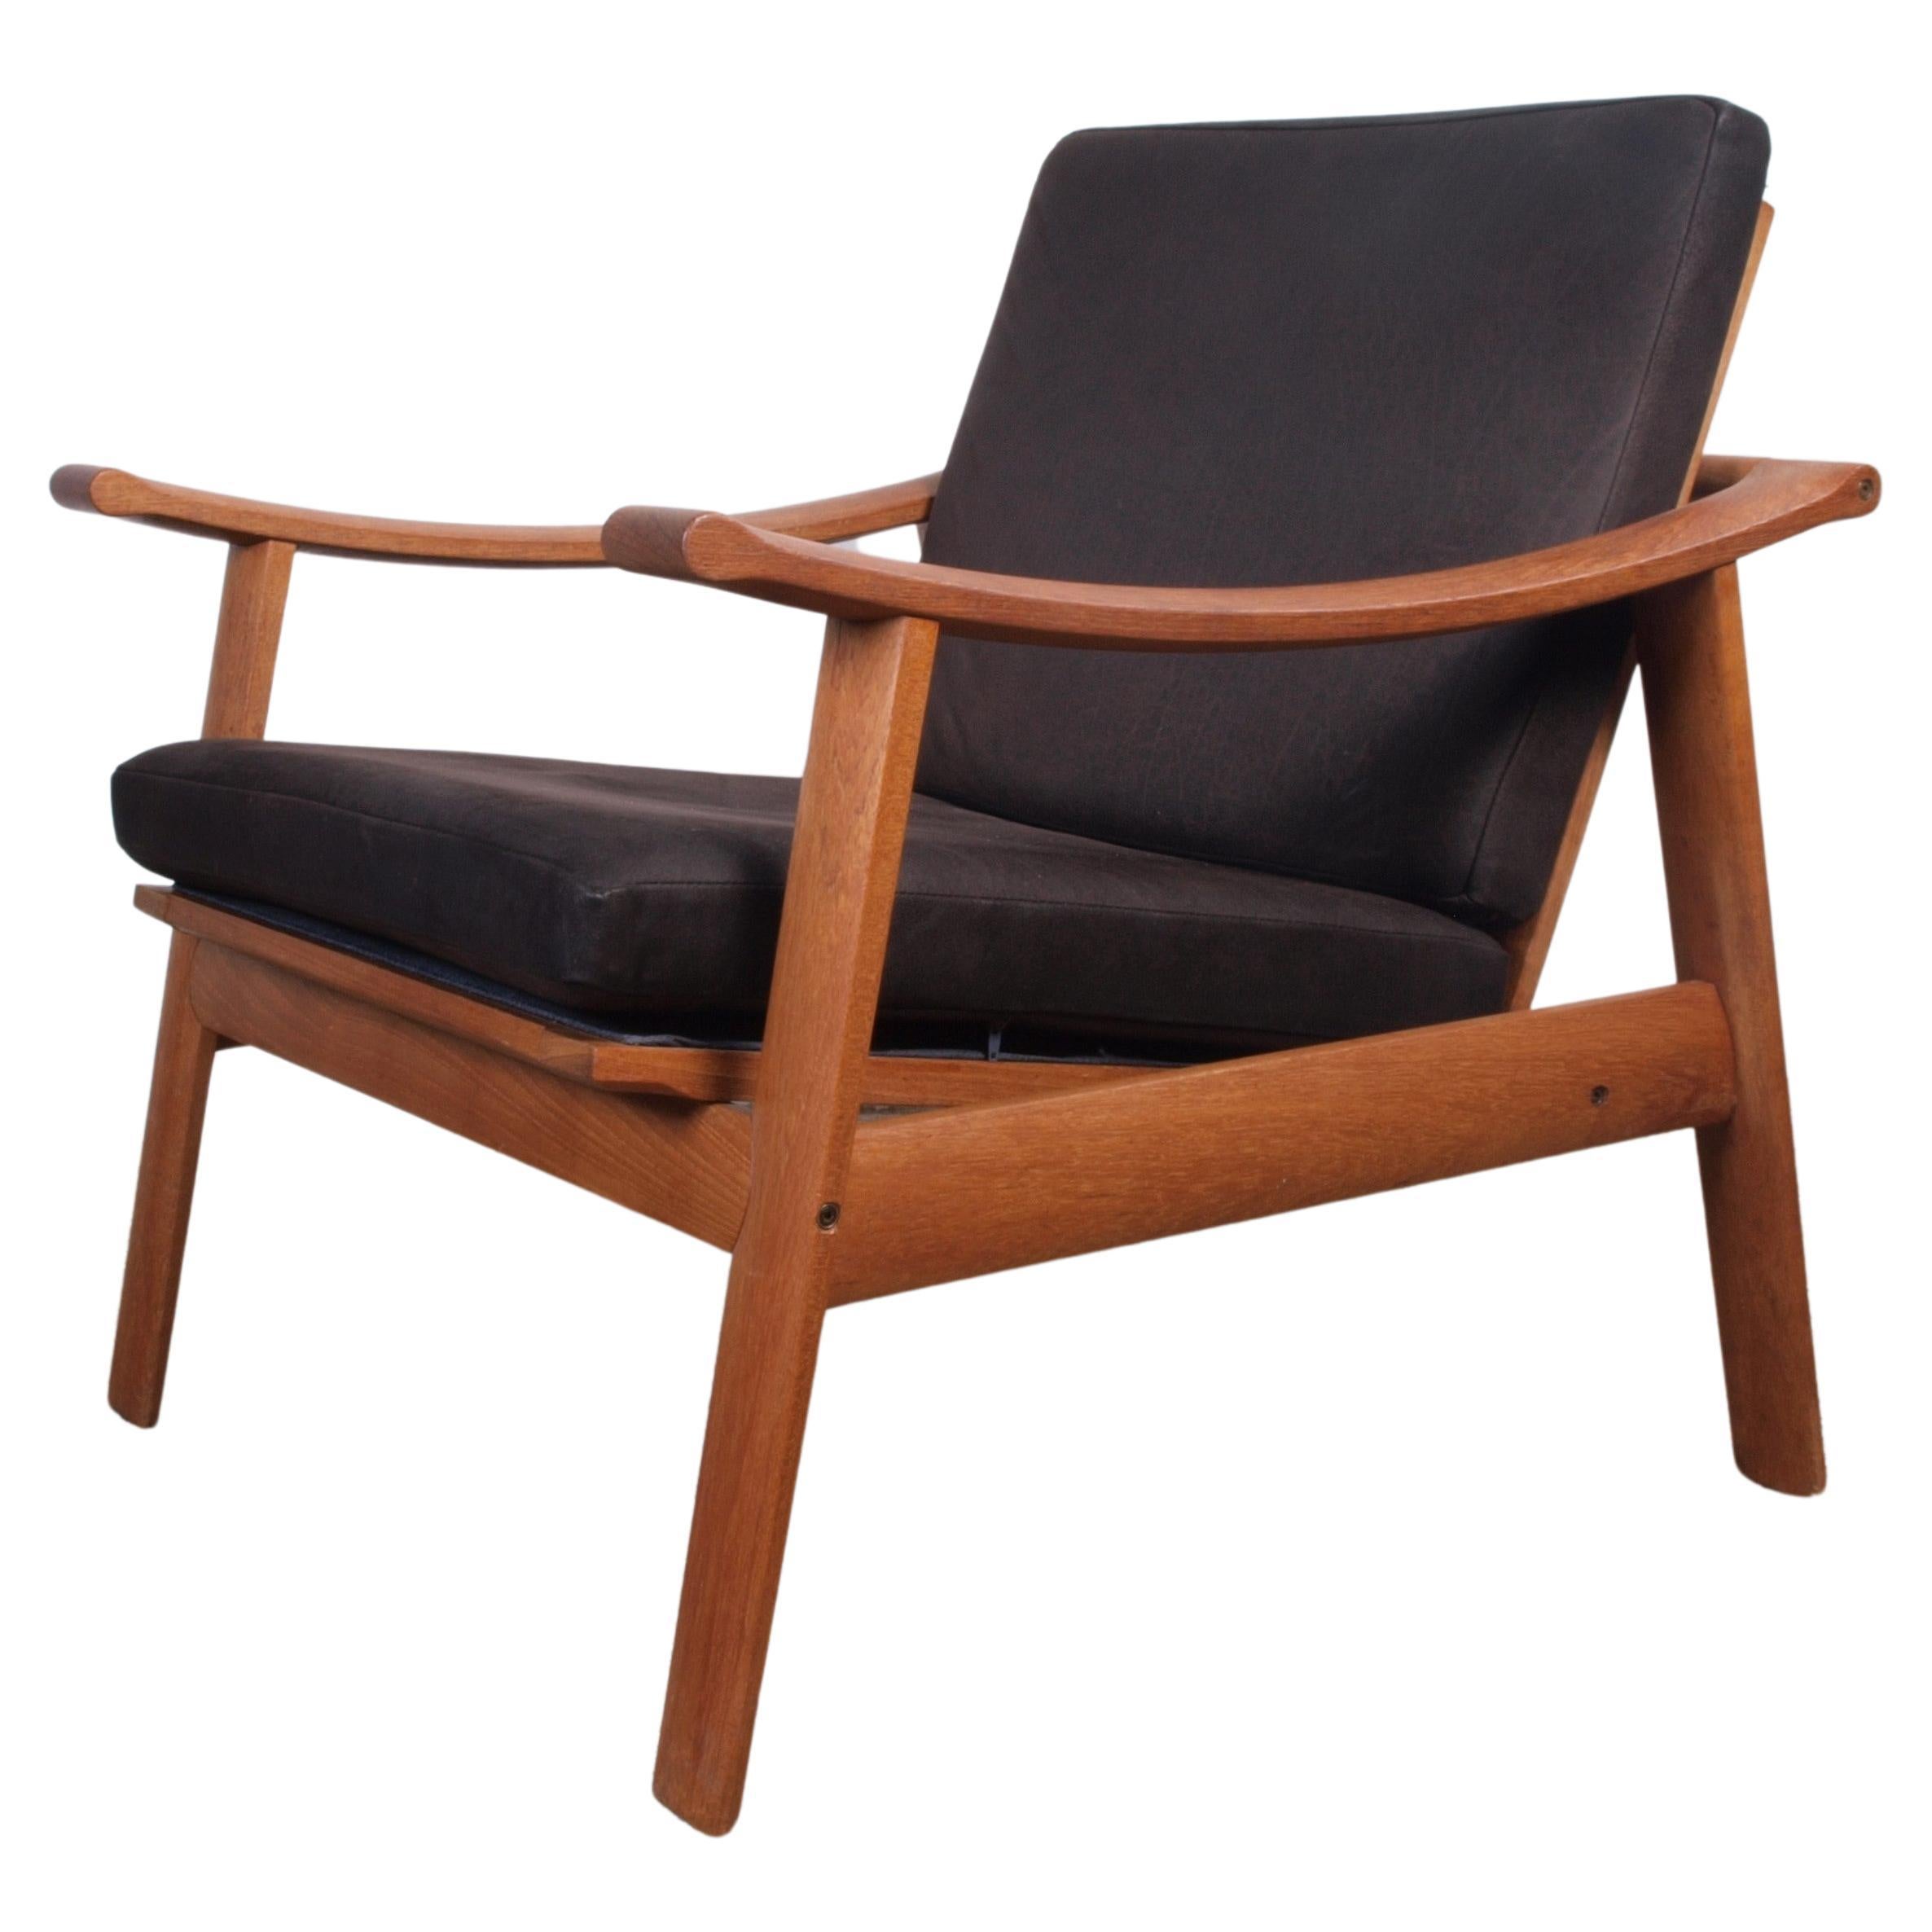 2 Design Mid-Century Lounge Chairs in Teak from Denmark For Sale